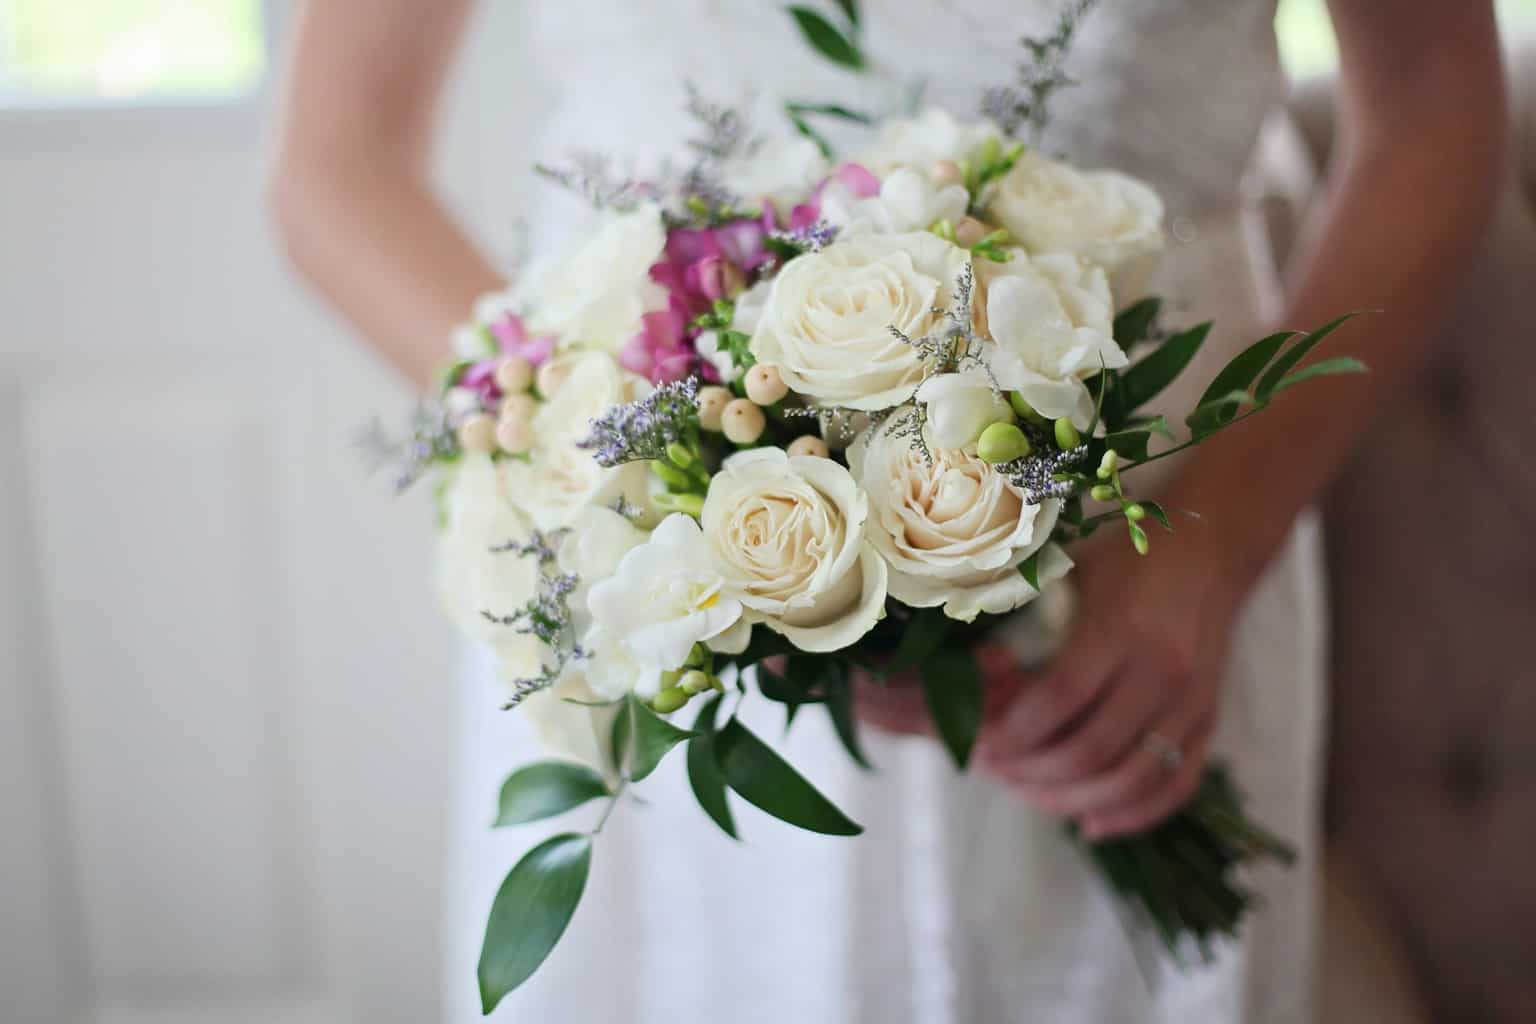 Brides Holding White Bouquet of Roses